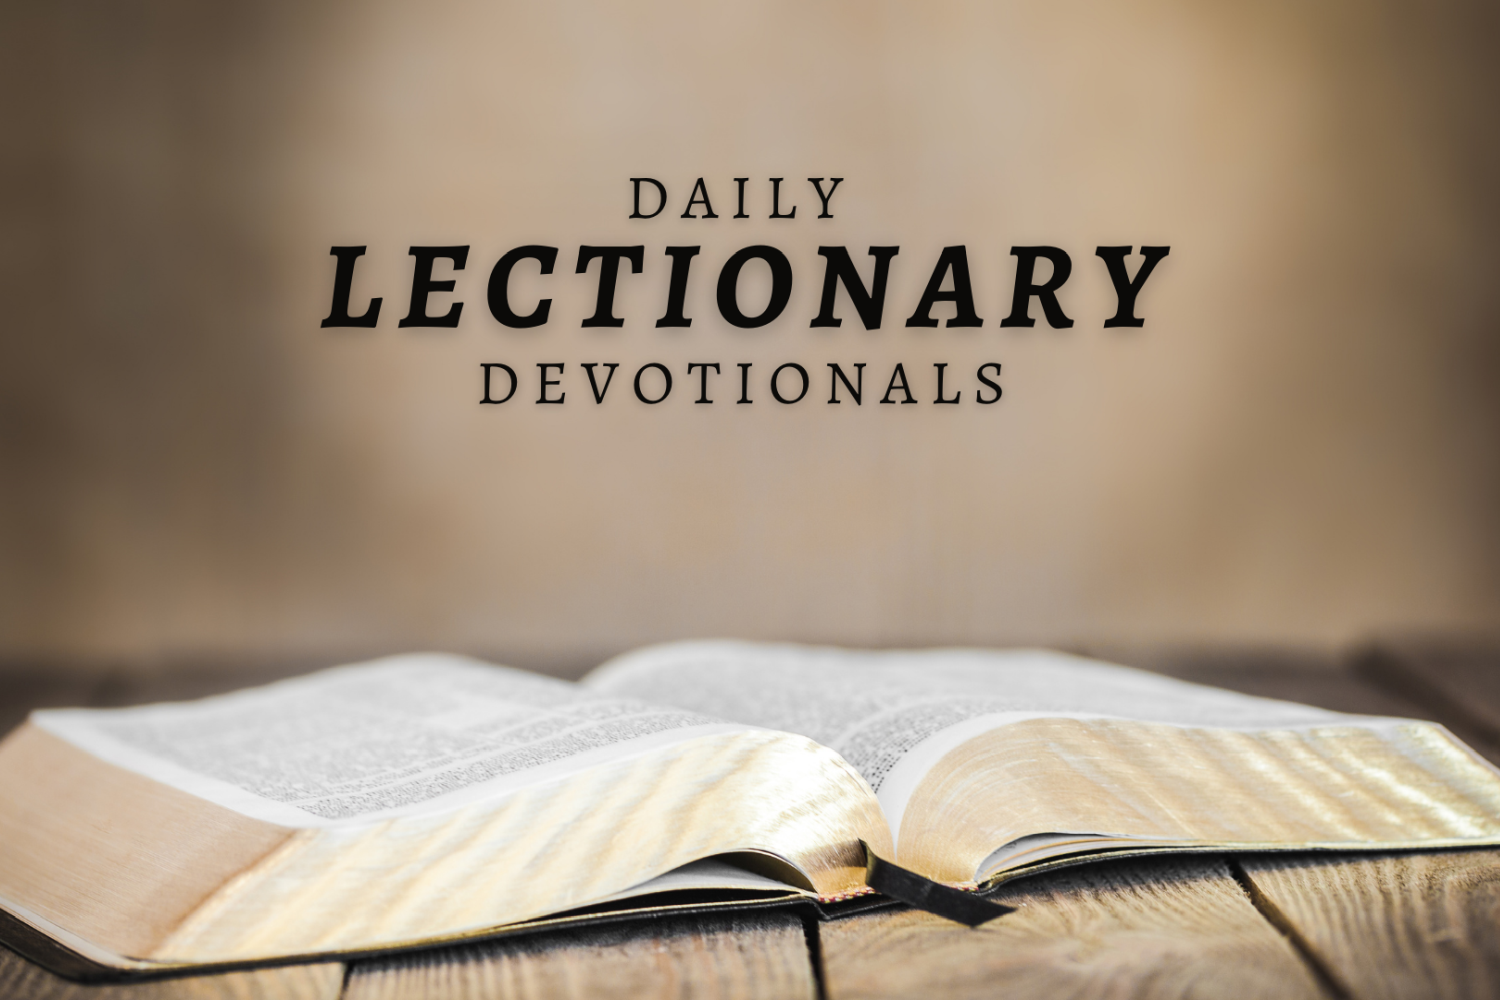 Daily Lectionary Devotionals